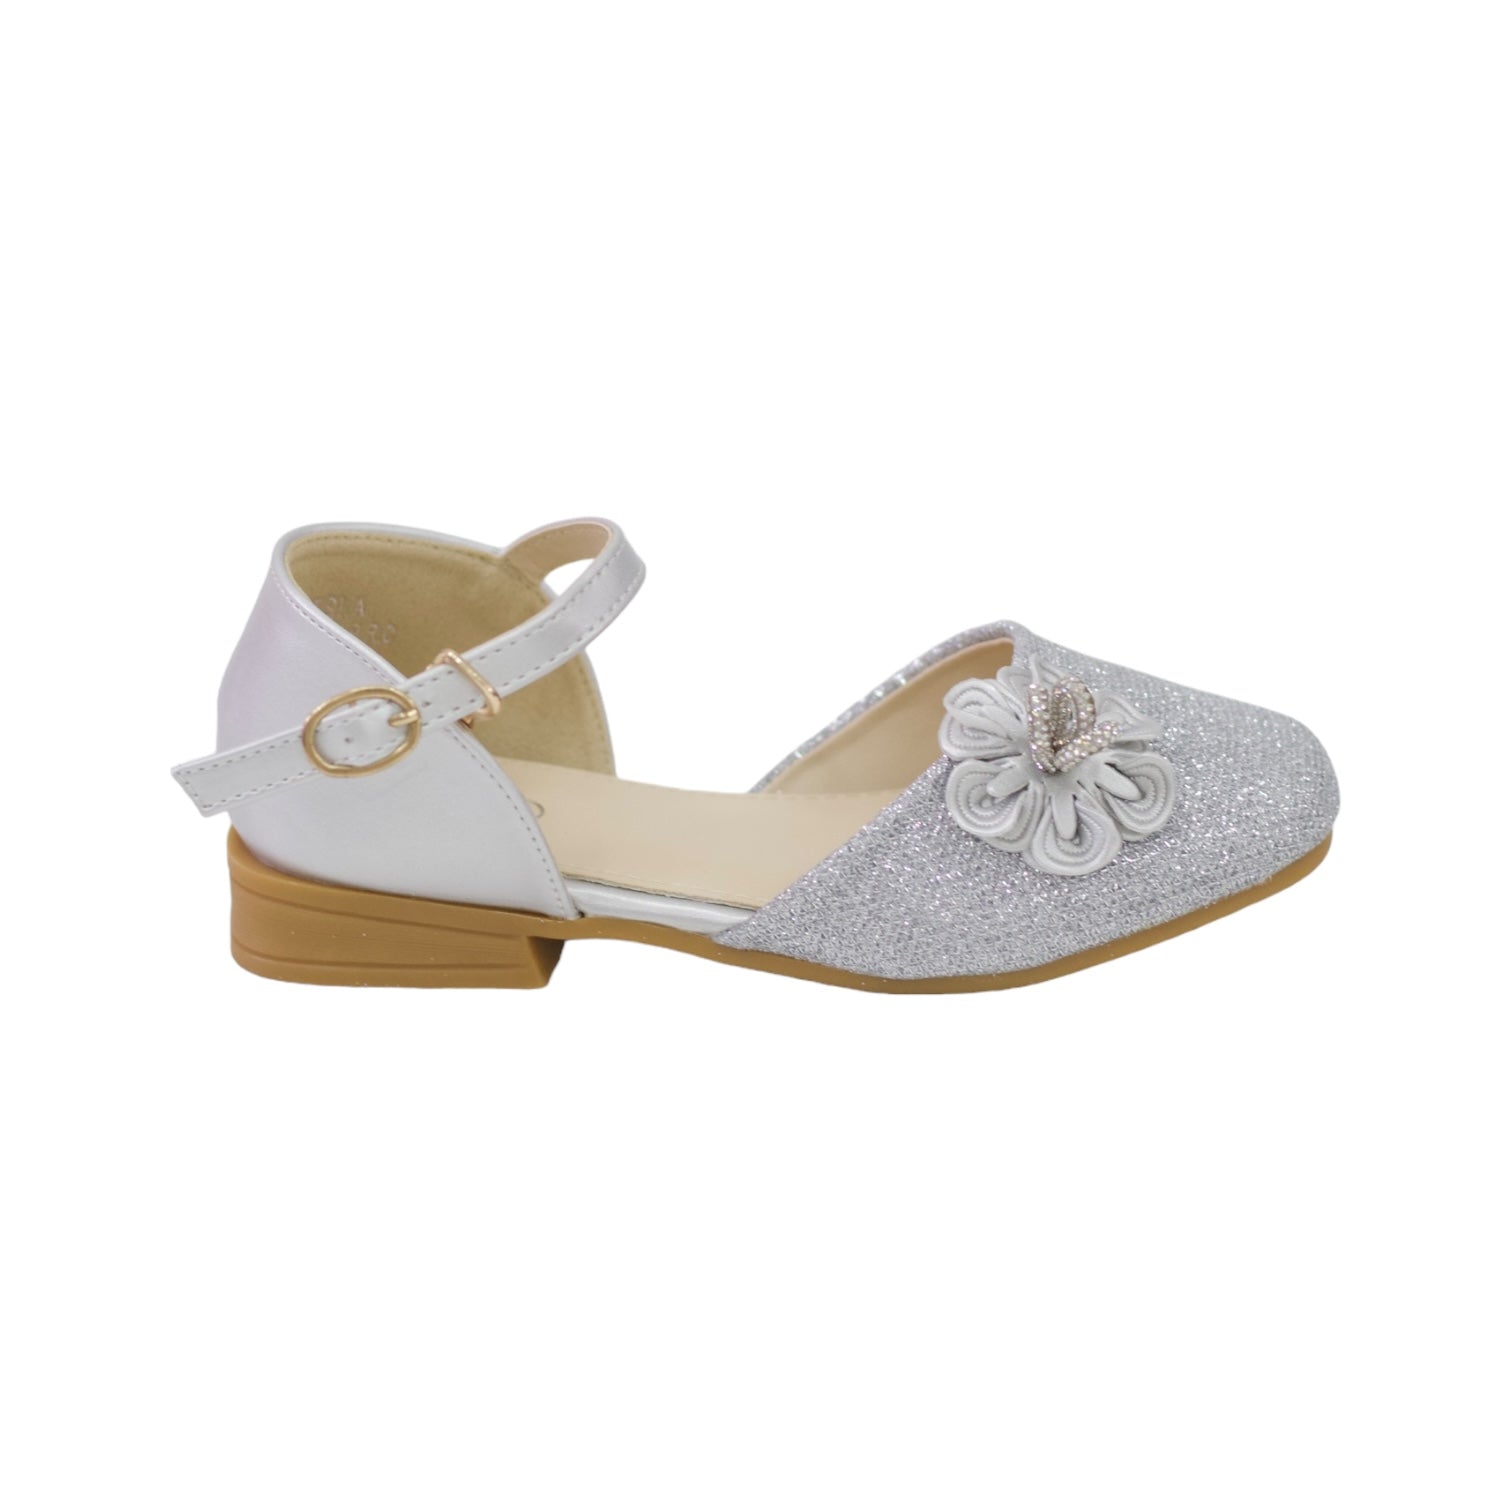 Silver girls bridal shoe with flower in shimmer isla